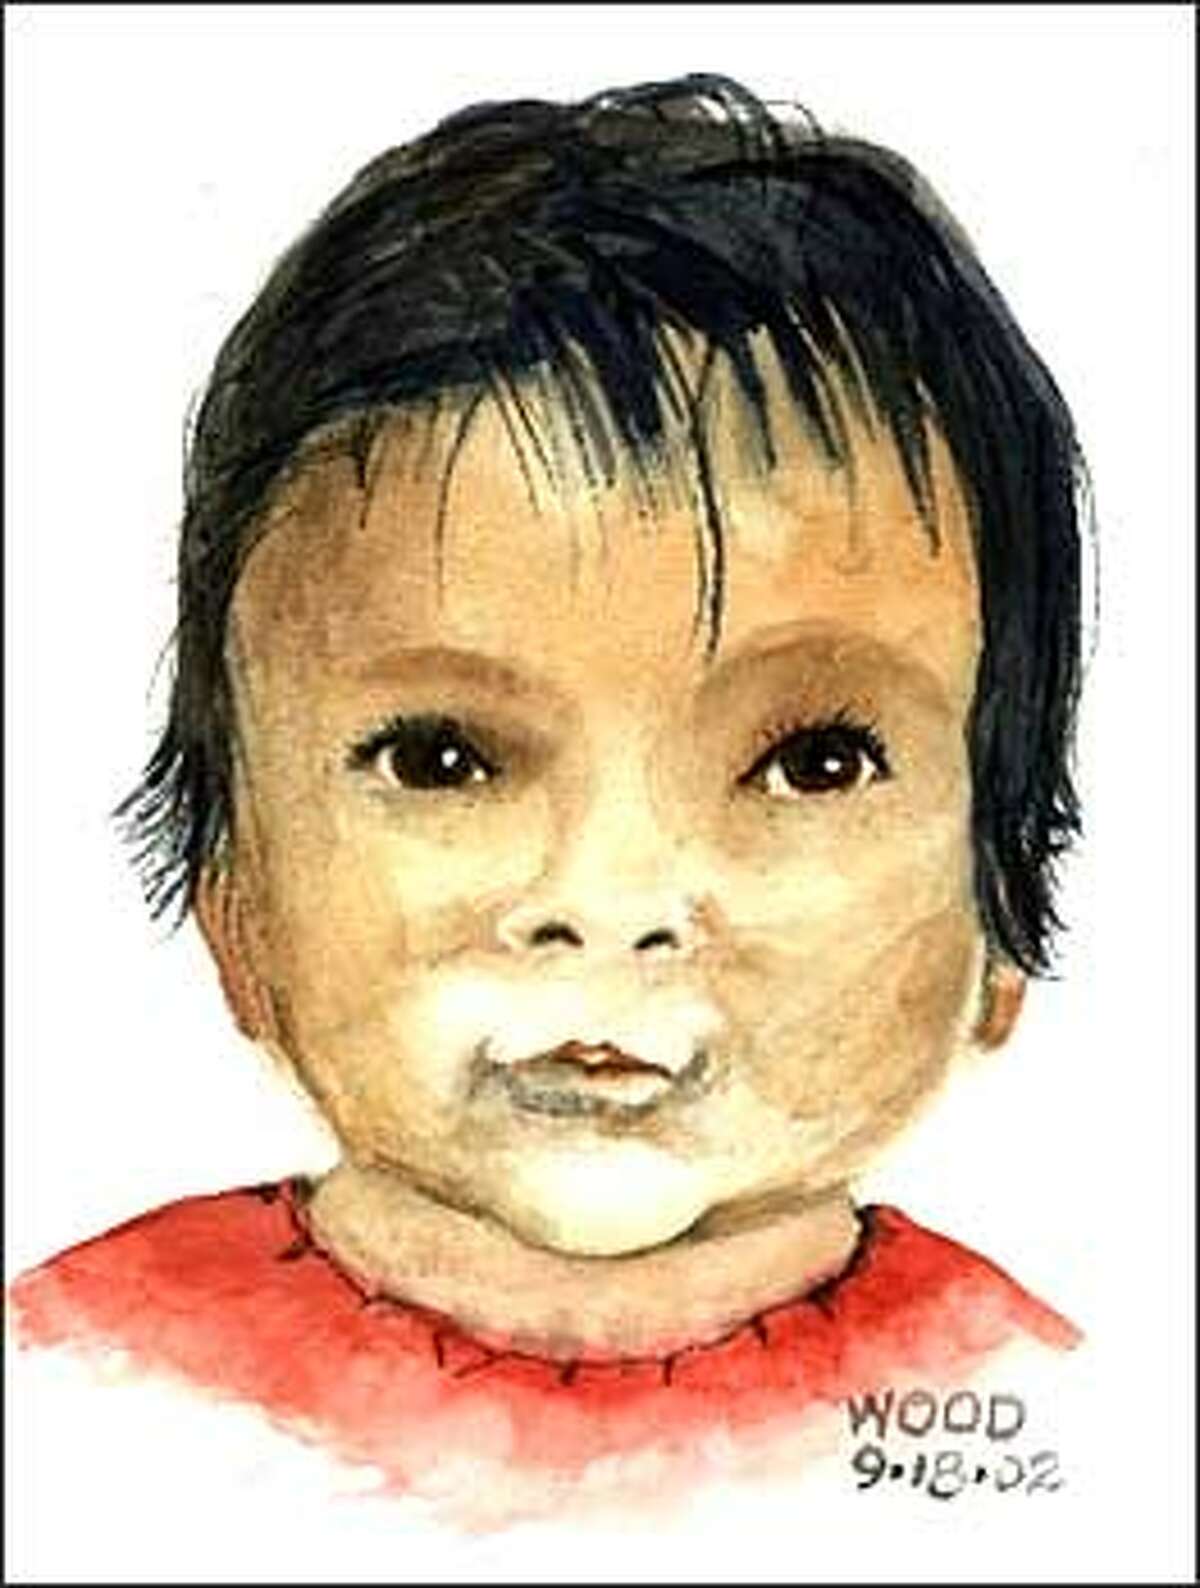 Forensic artist Dave Wood made this sketch of baby Jane Doe based on photographs supplied by investigators.